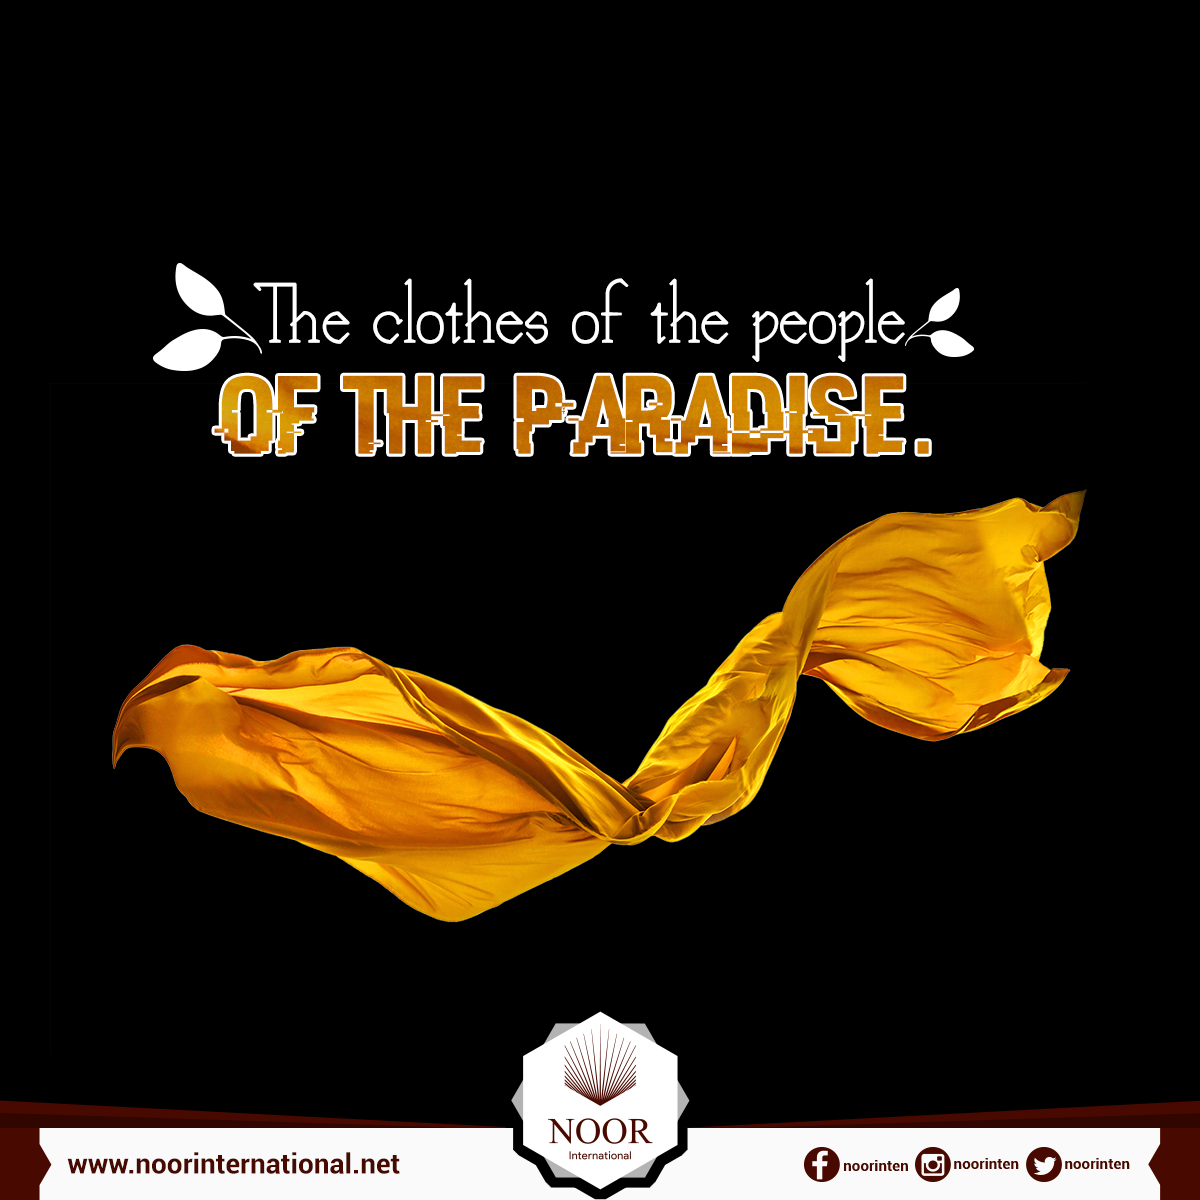 The clothes of the people of the Paradise.